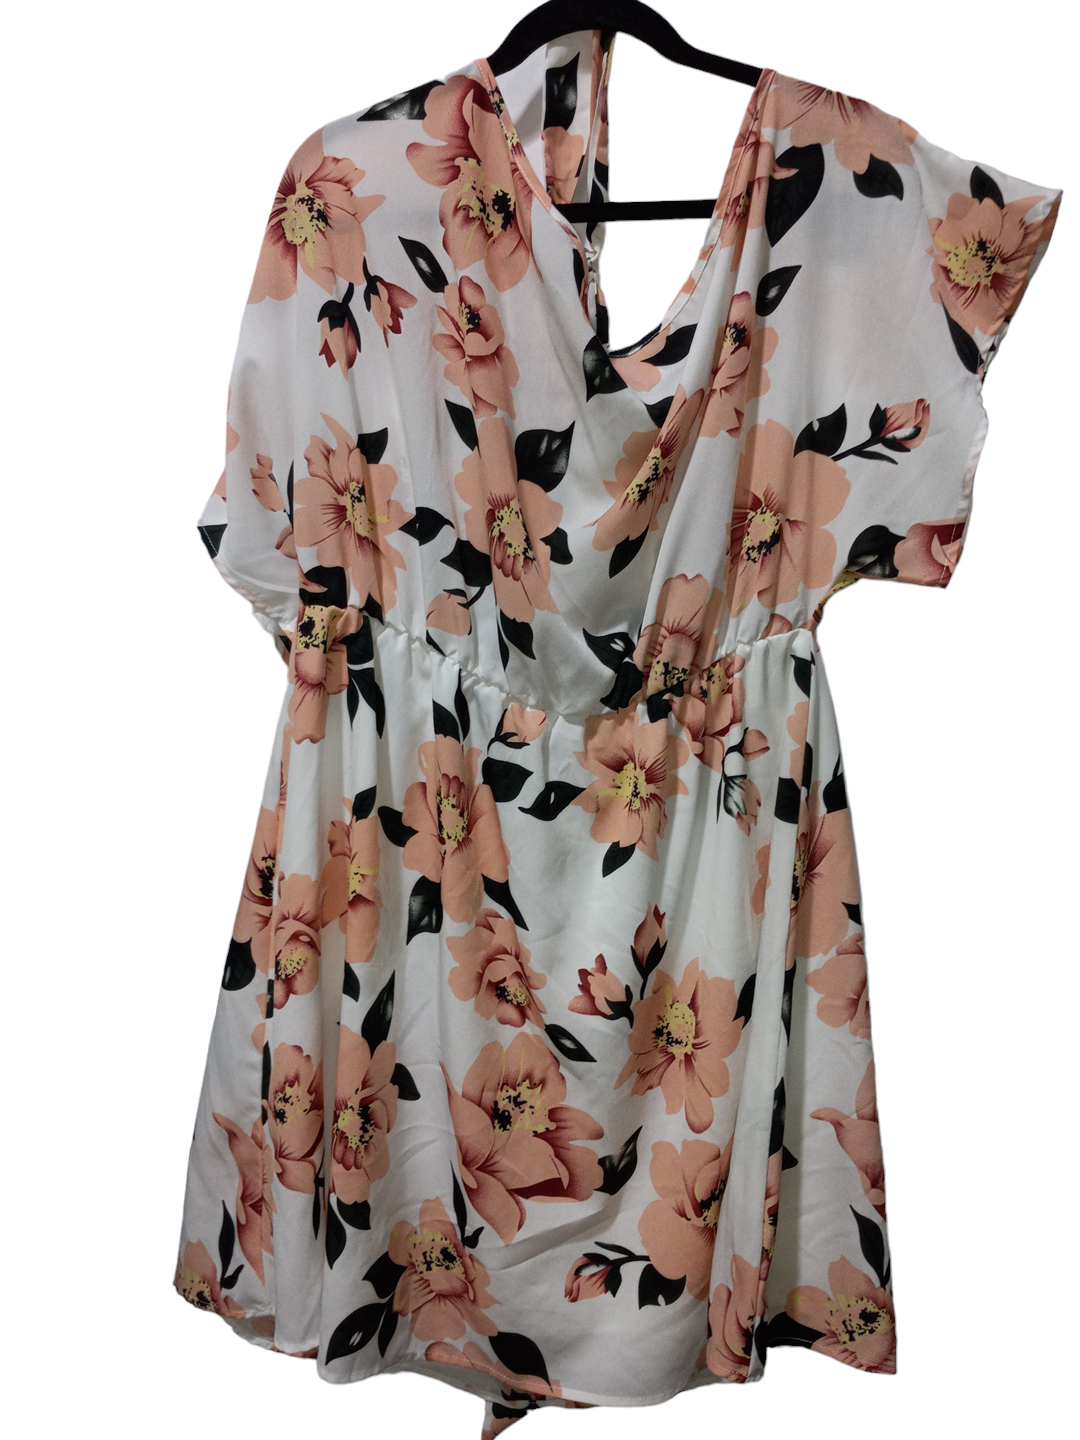 Floral Print Dress Casual Short Shein, Size 1x